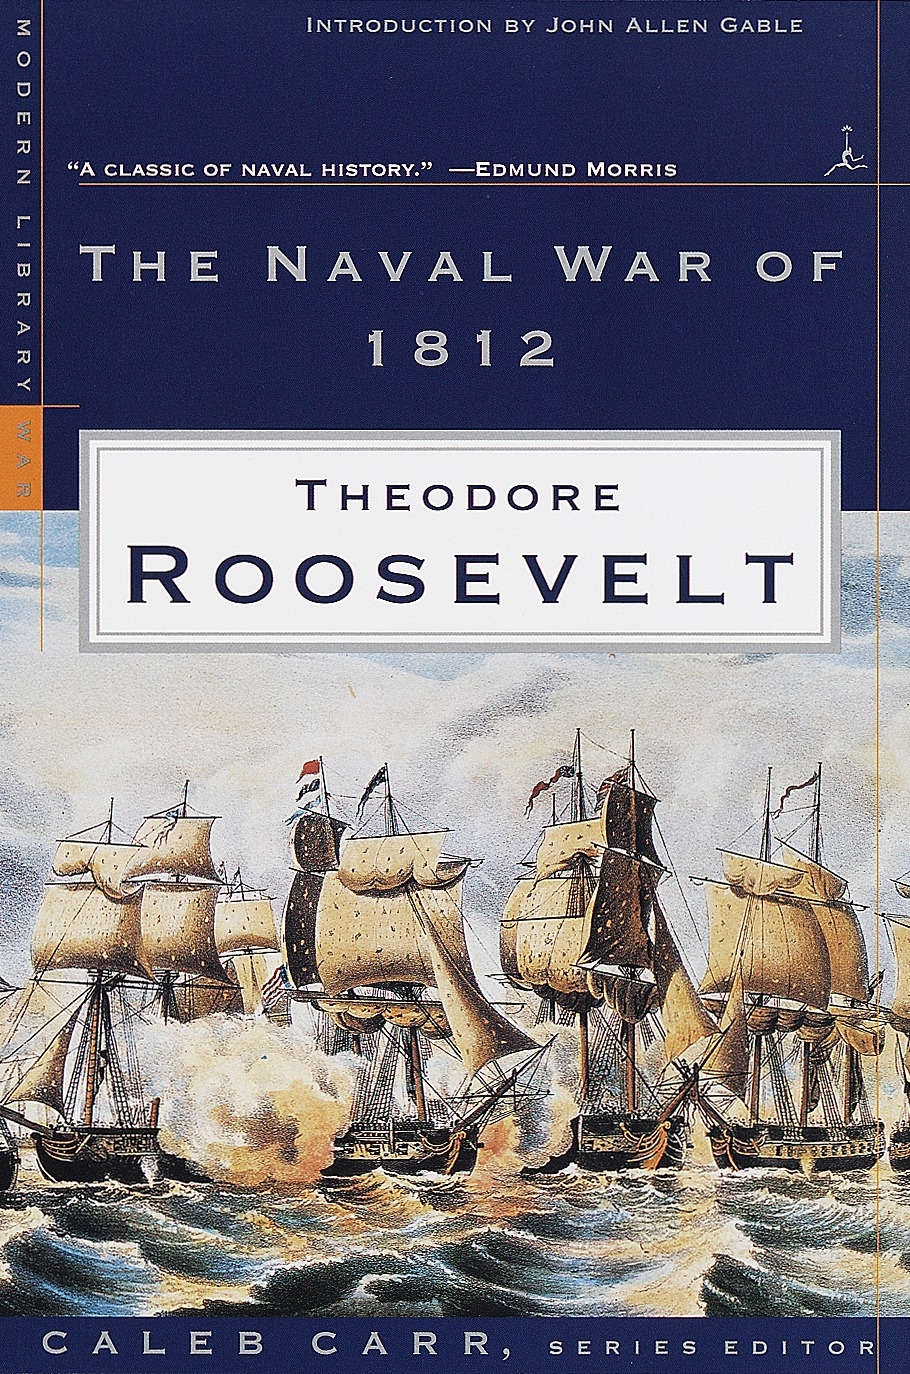 The Naval War Of 1812 By Theodore Roosevelt Penguin Books New Zealand